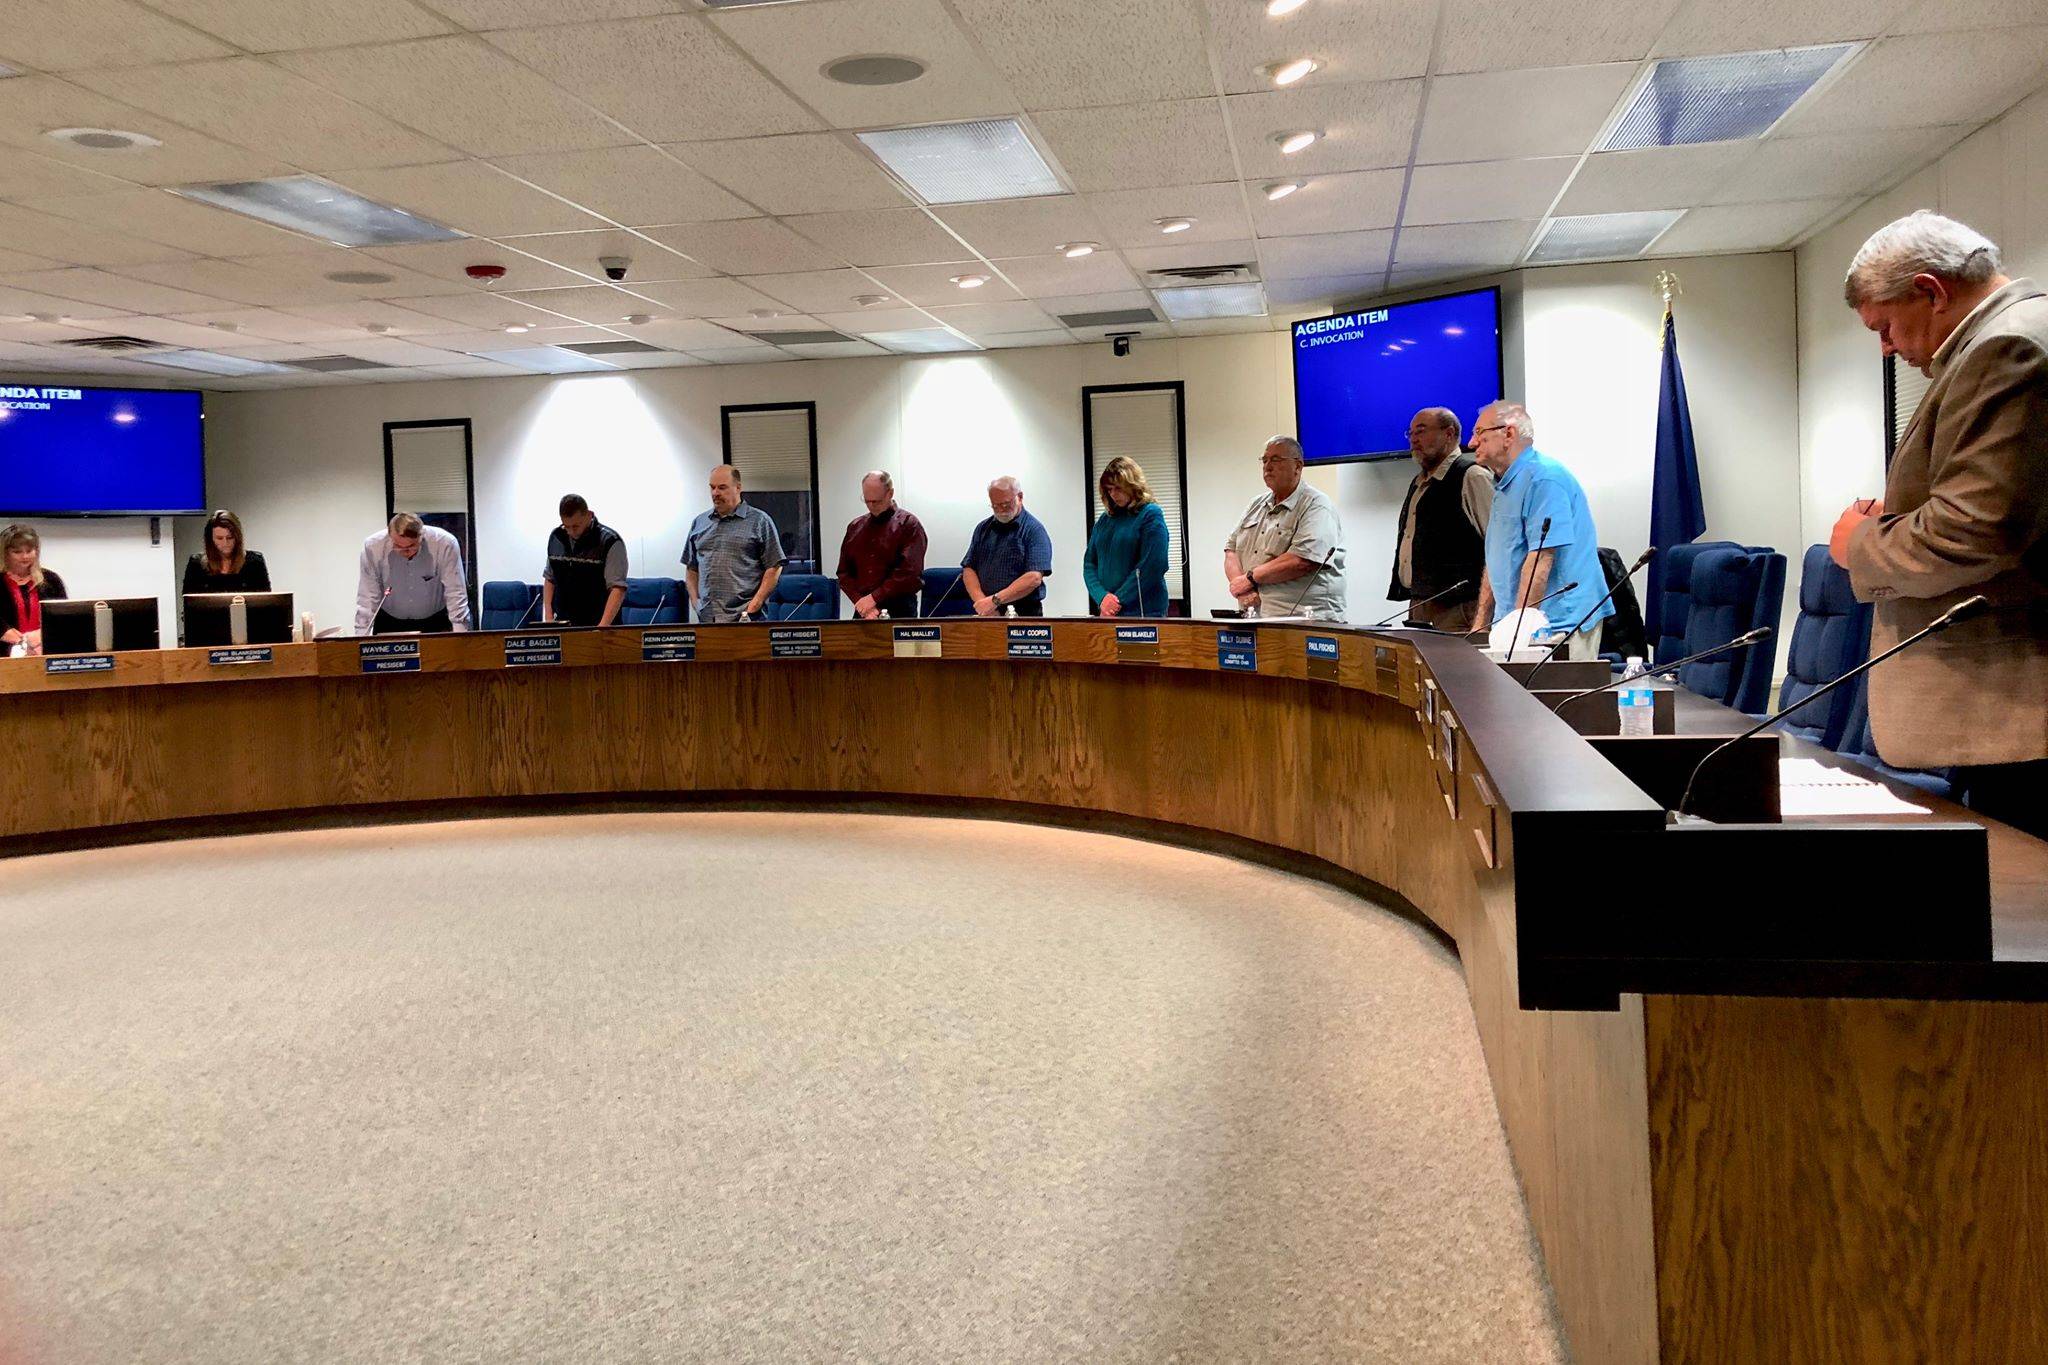 The Kenai Peninsula Borough Assembly stands in silence while Assembly President Wayne Ogle offers an invocation before the meeting, Tuesday, Oct. 23, 2018, in Soldotna, AK. (Photo by Victoria Petersen/Peninsula Clarion)